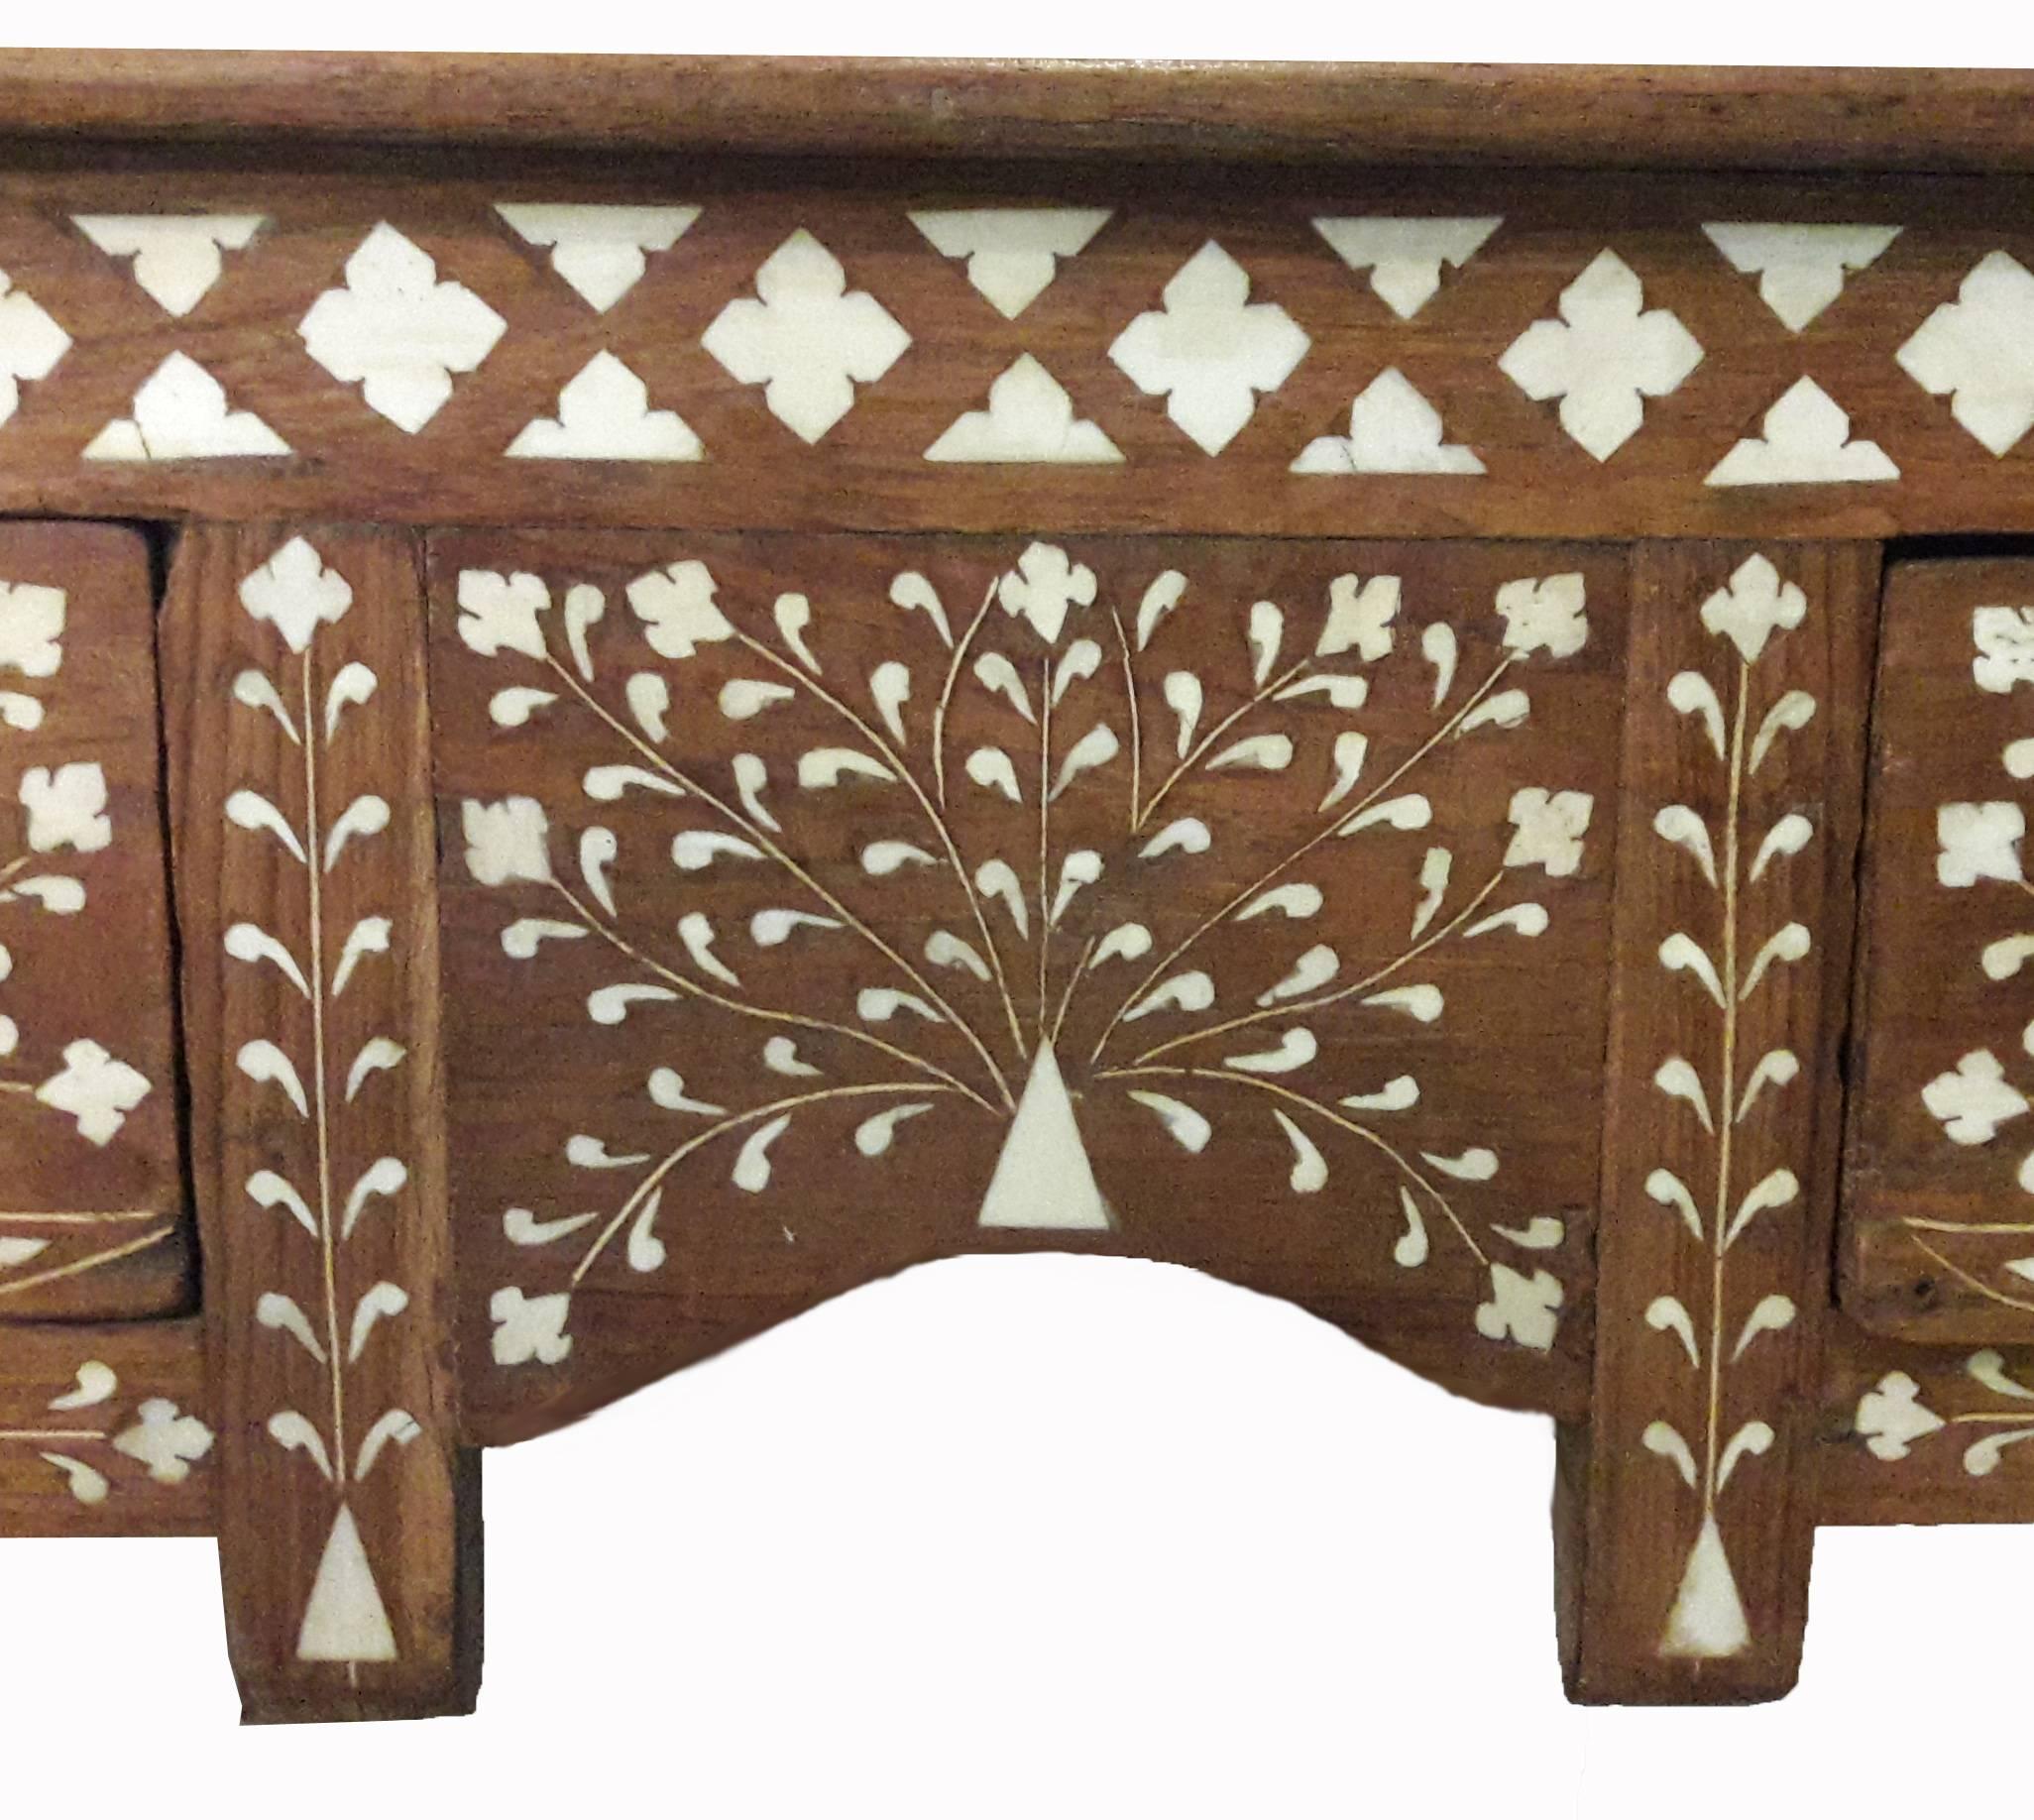 A teak desk from India, with bone inlaid traditional pattern. Two drawers with porcelain pulls, side stretchers. Ideal as a desk, console or occasional table.